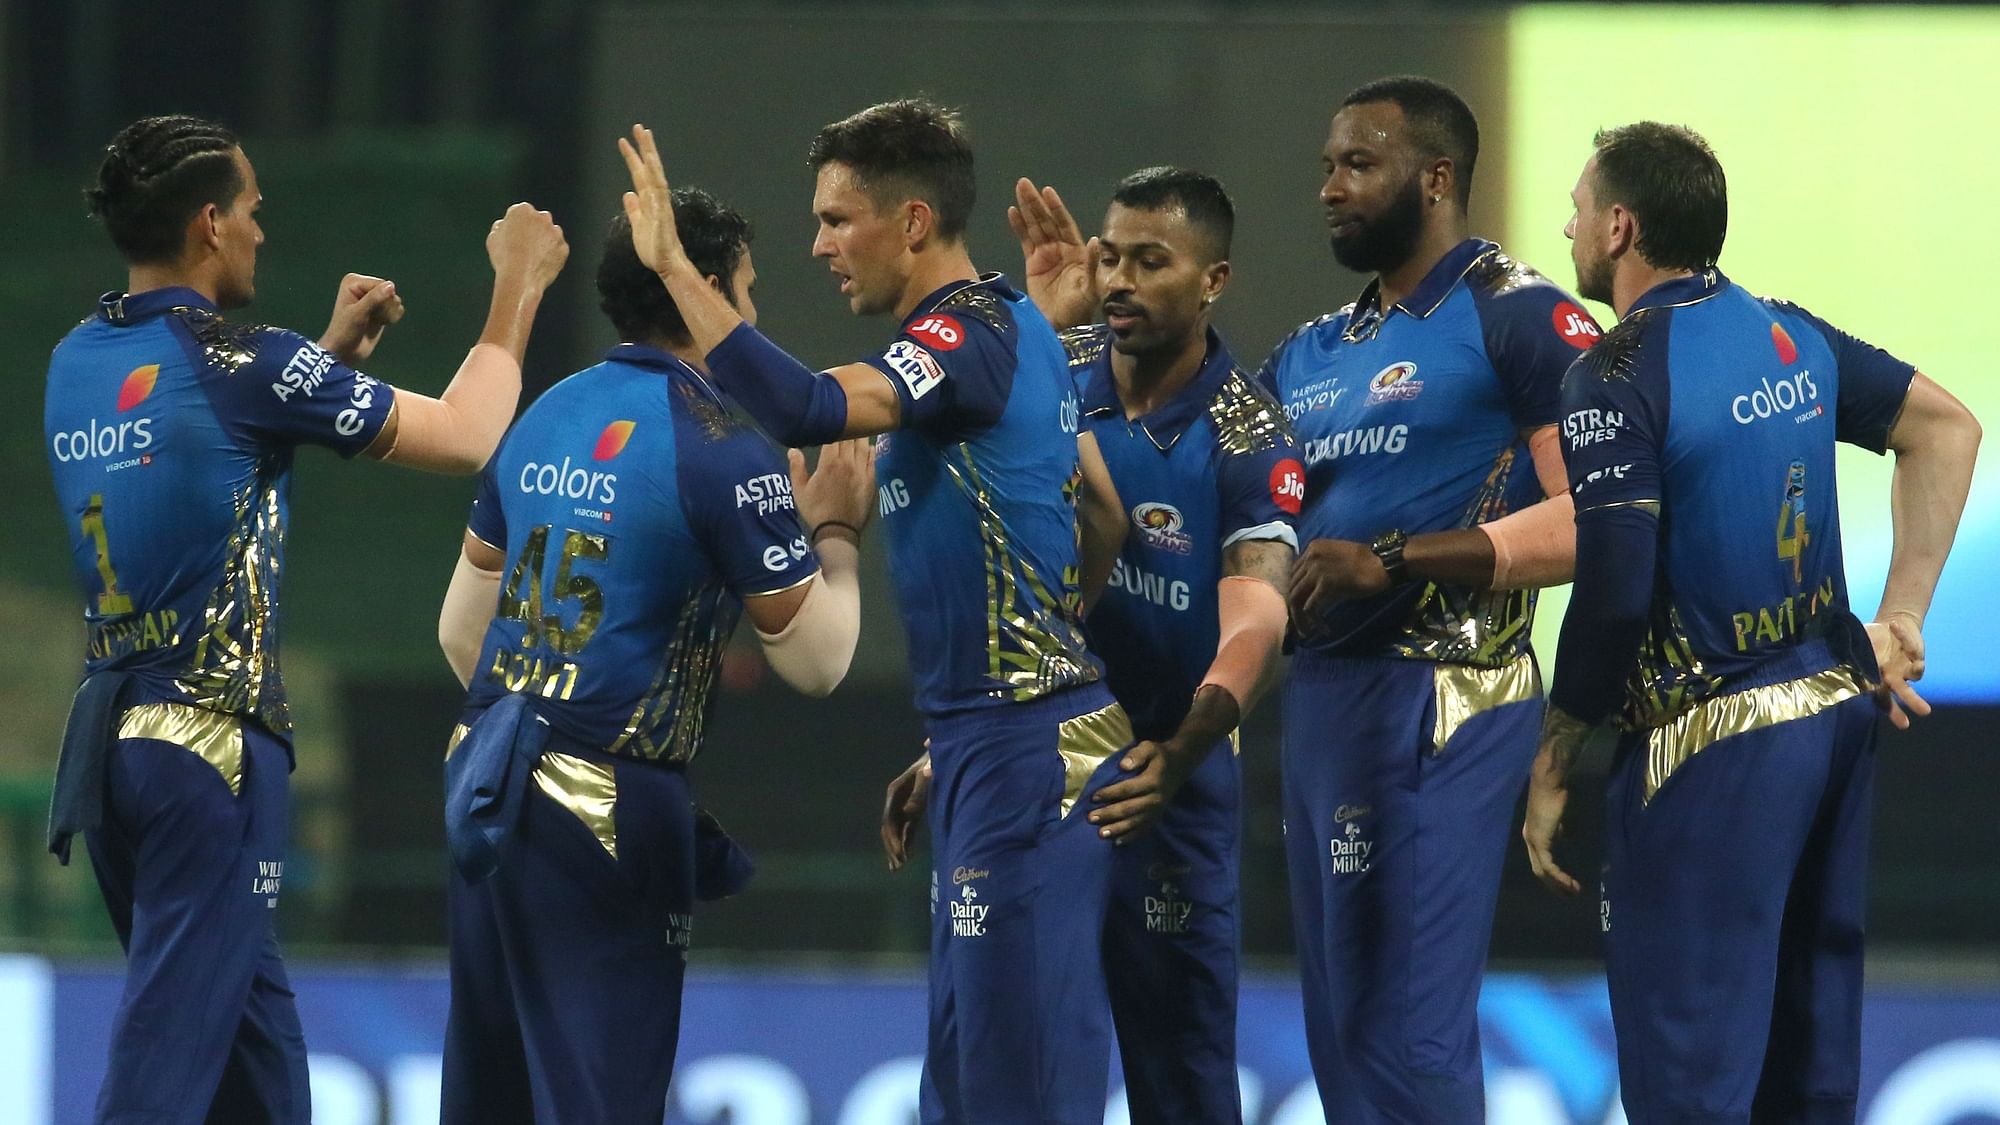 Reigning champions Mumbai Indians strolled to a 49-run win over Kolkata Knight Riders.